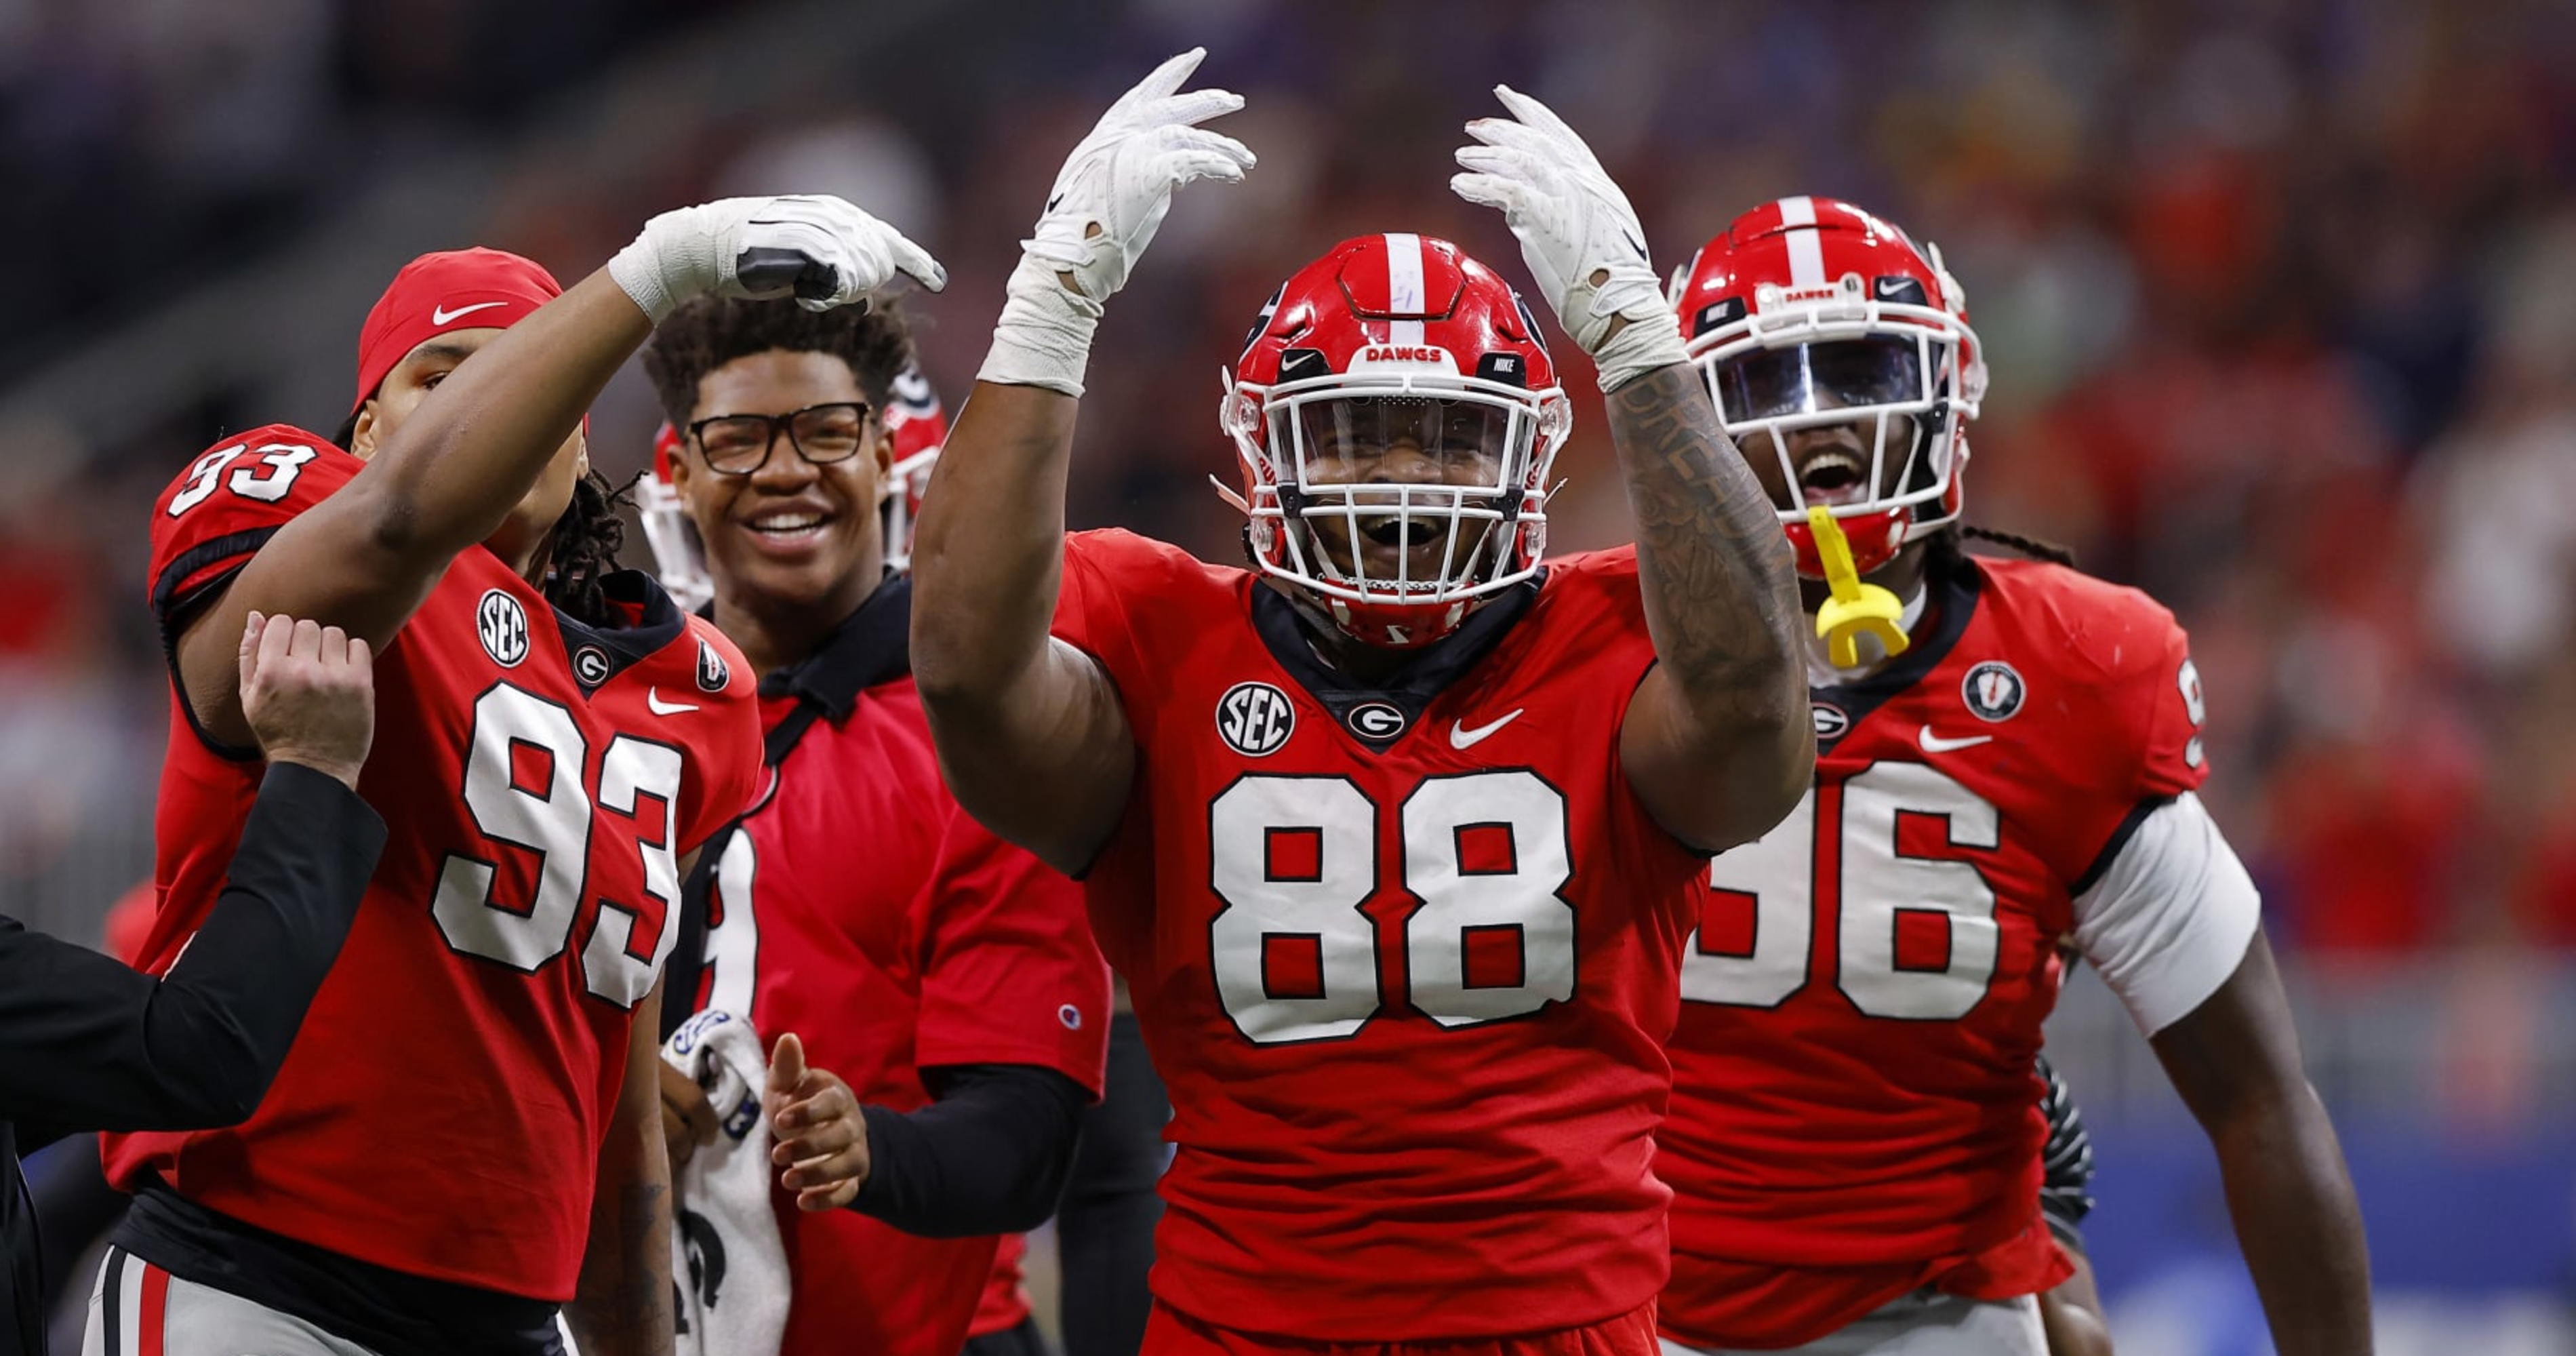 Georgia defensive tackle Jalen Carter goes No. 5 to Seattle Seahawks